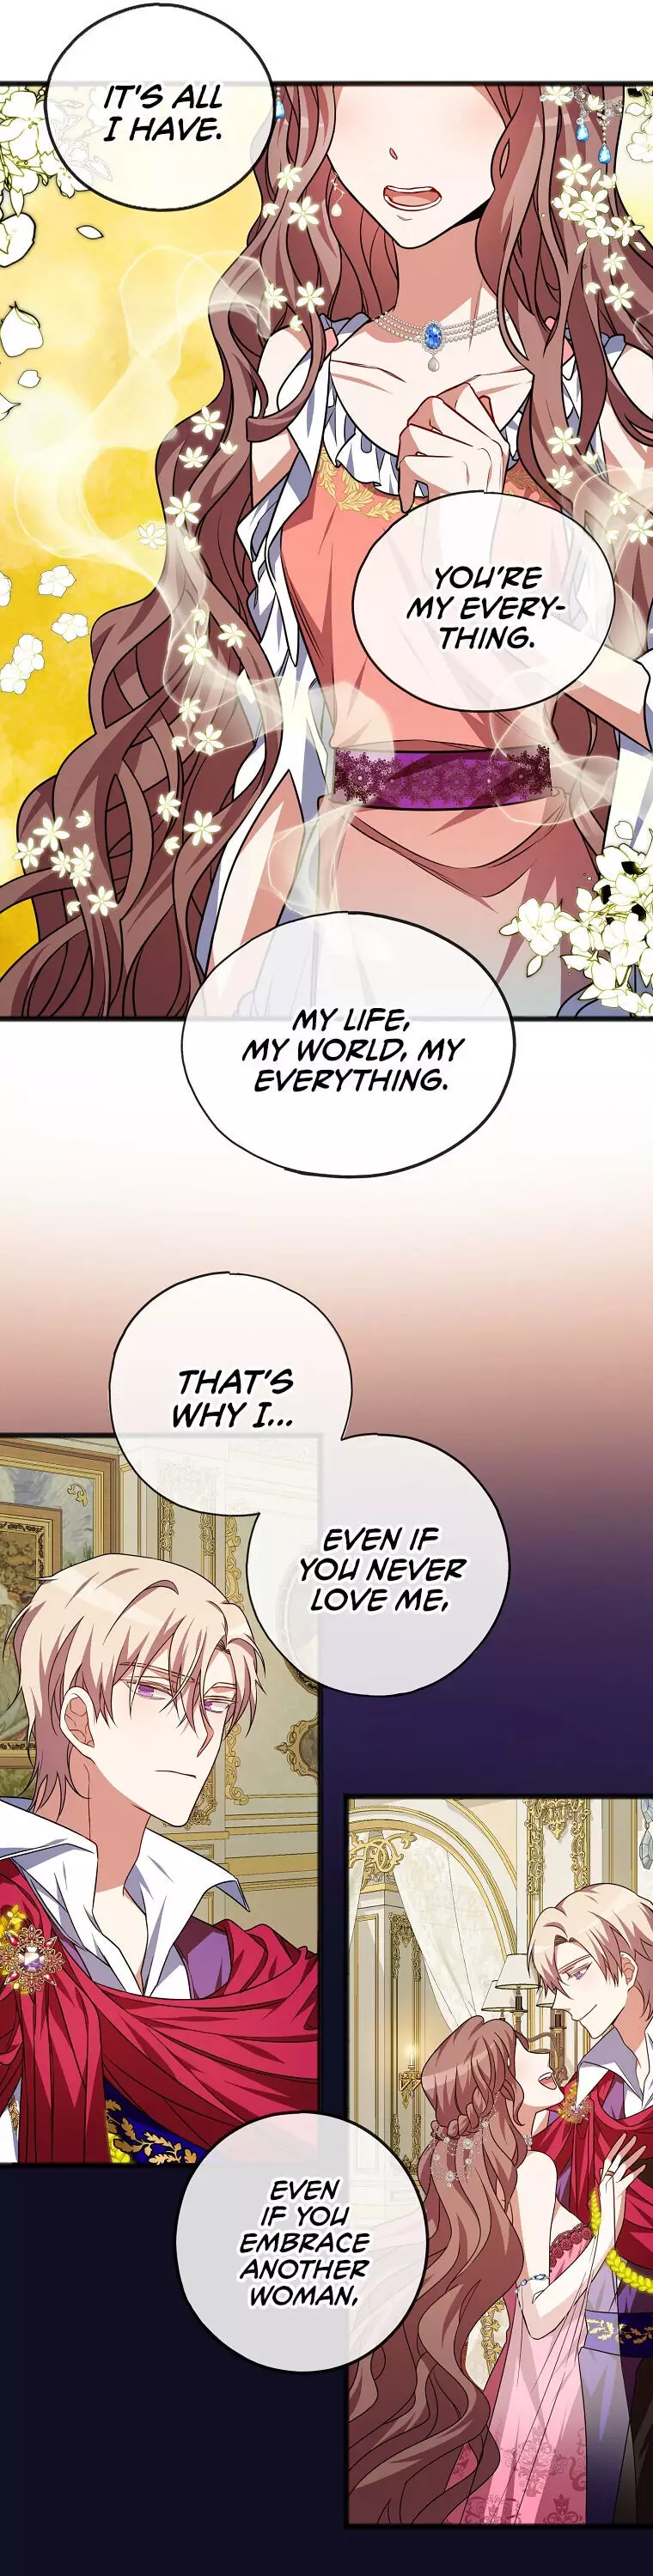 To You Who Never Loved Me - 1 page 4